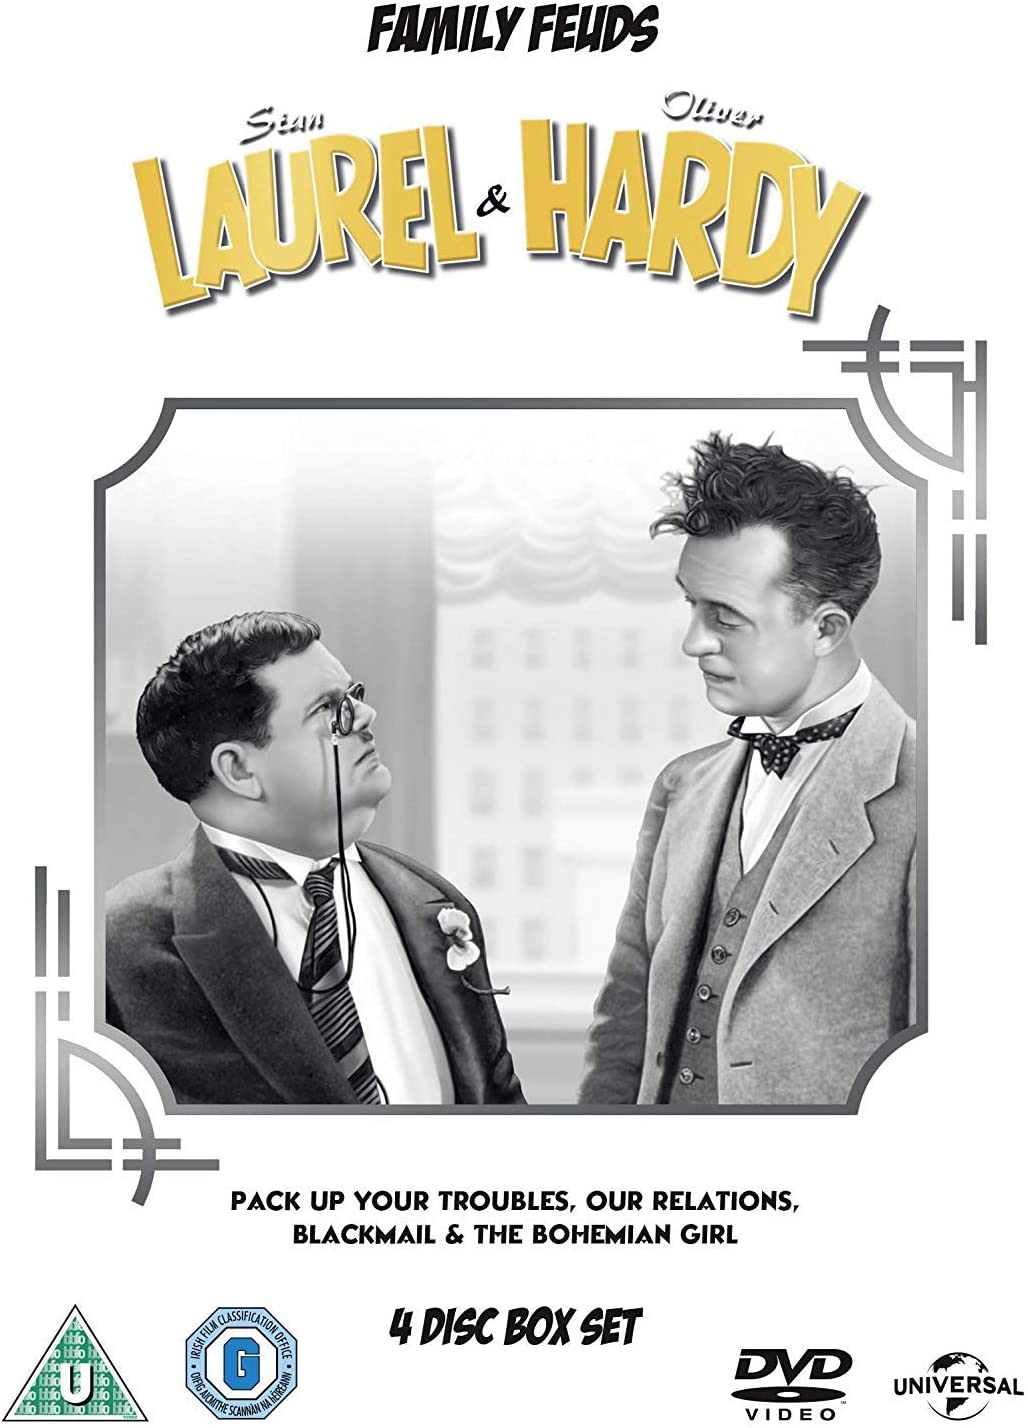 Laurel And Hardy: Family Feuds (DVD)